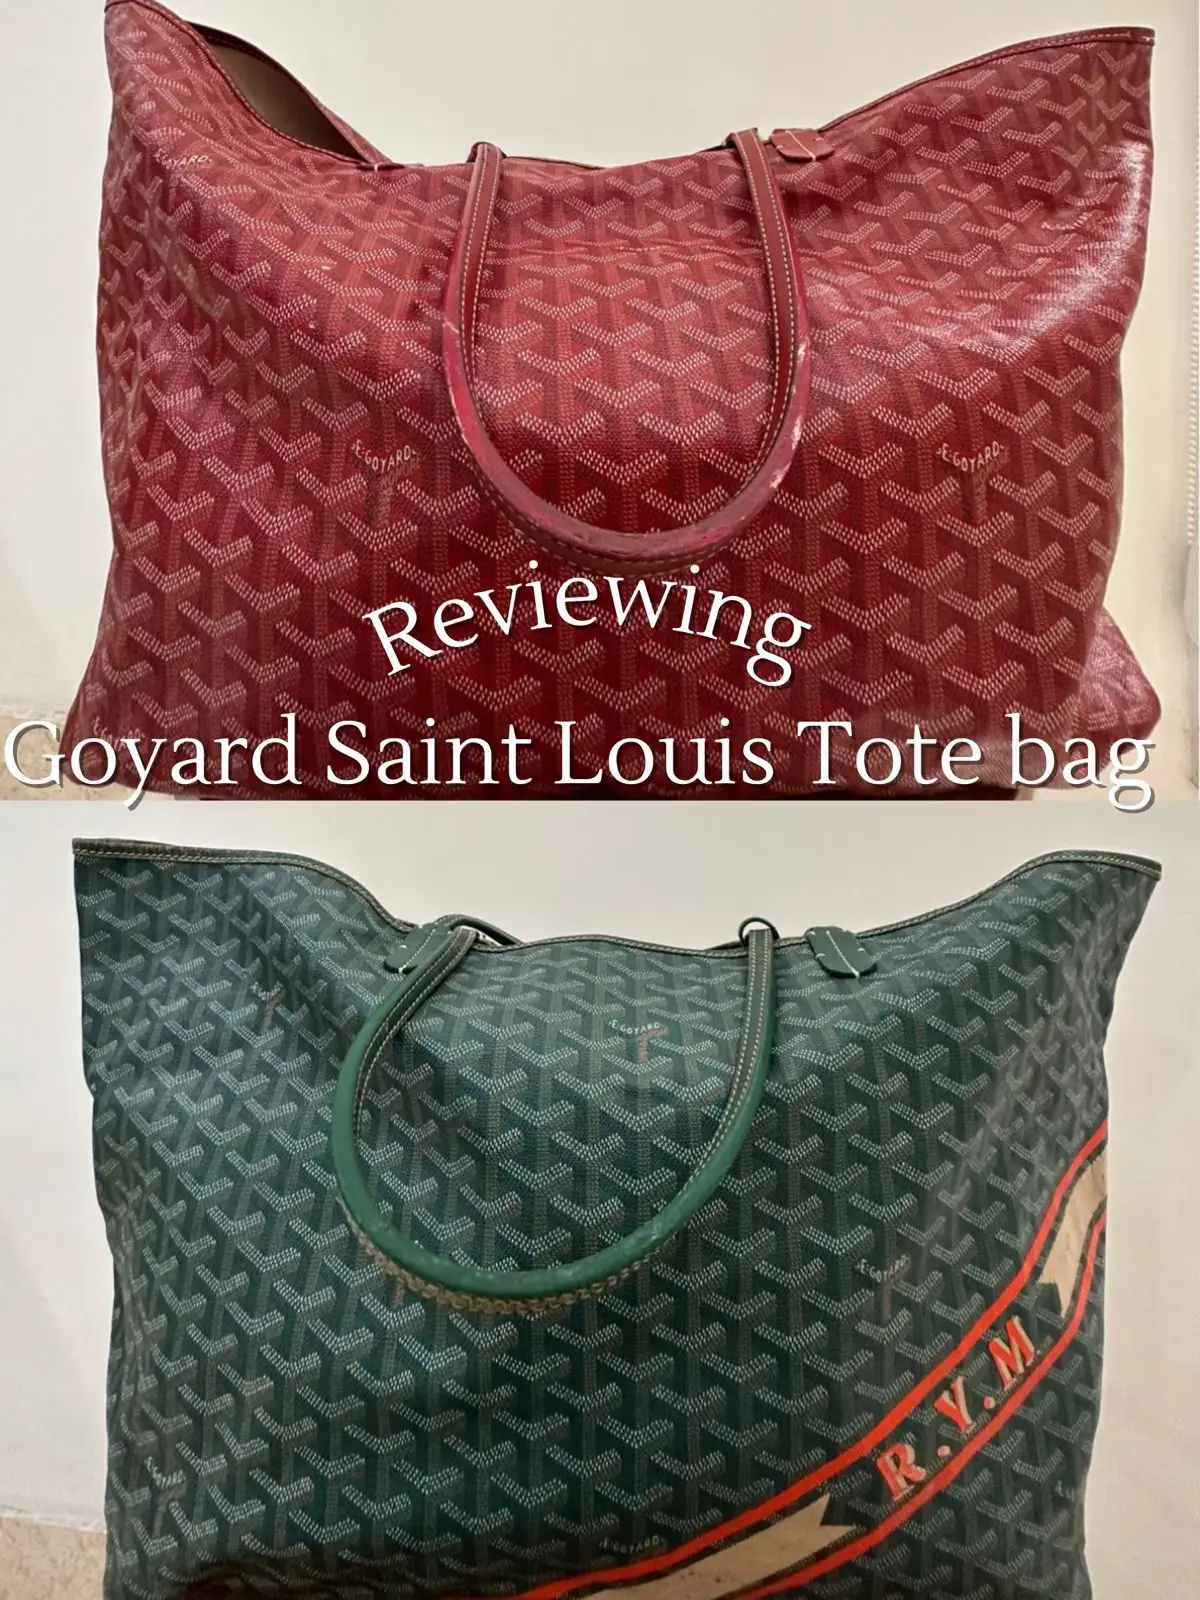 Goyard Bags Review: Saint Louis vs Artois Totes, Quality Issues, and My Own  Experiences 